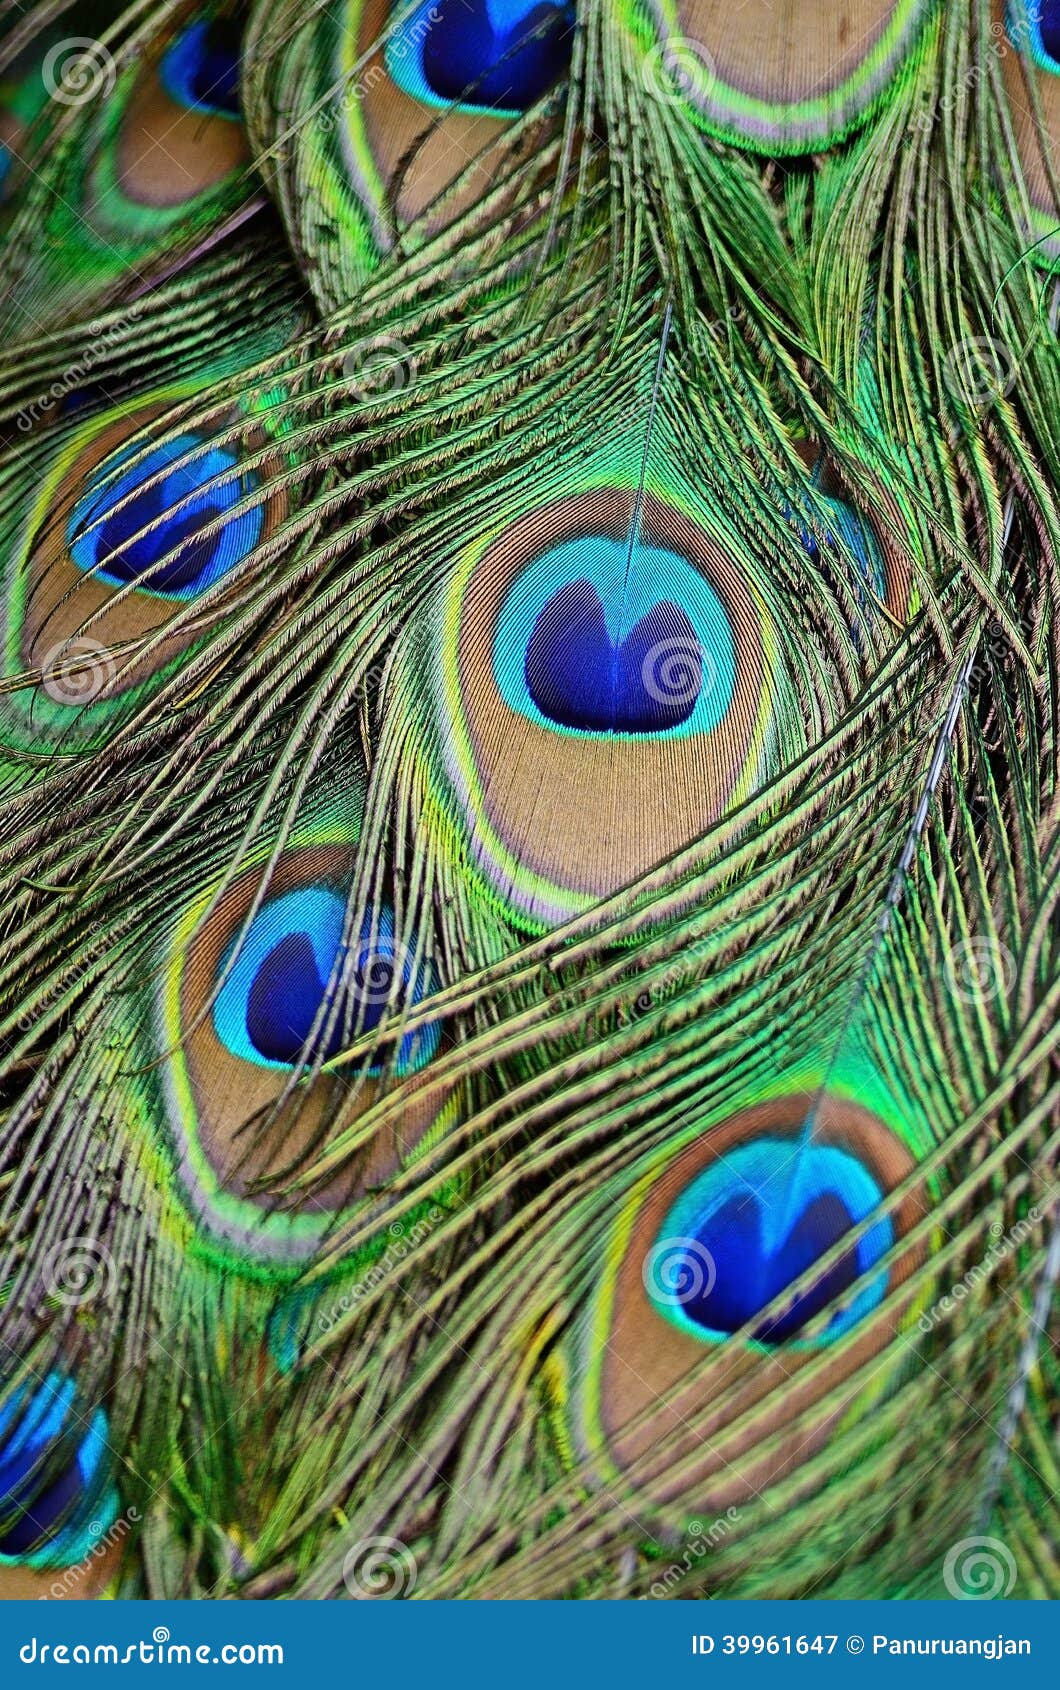 Male Green Peacock Feathers Stock Image - Image of plumage, elegant ...